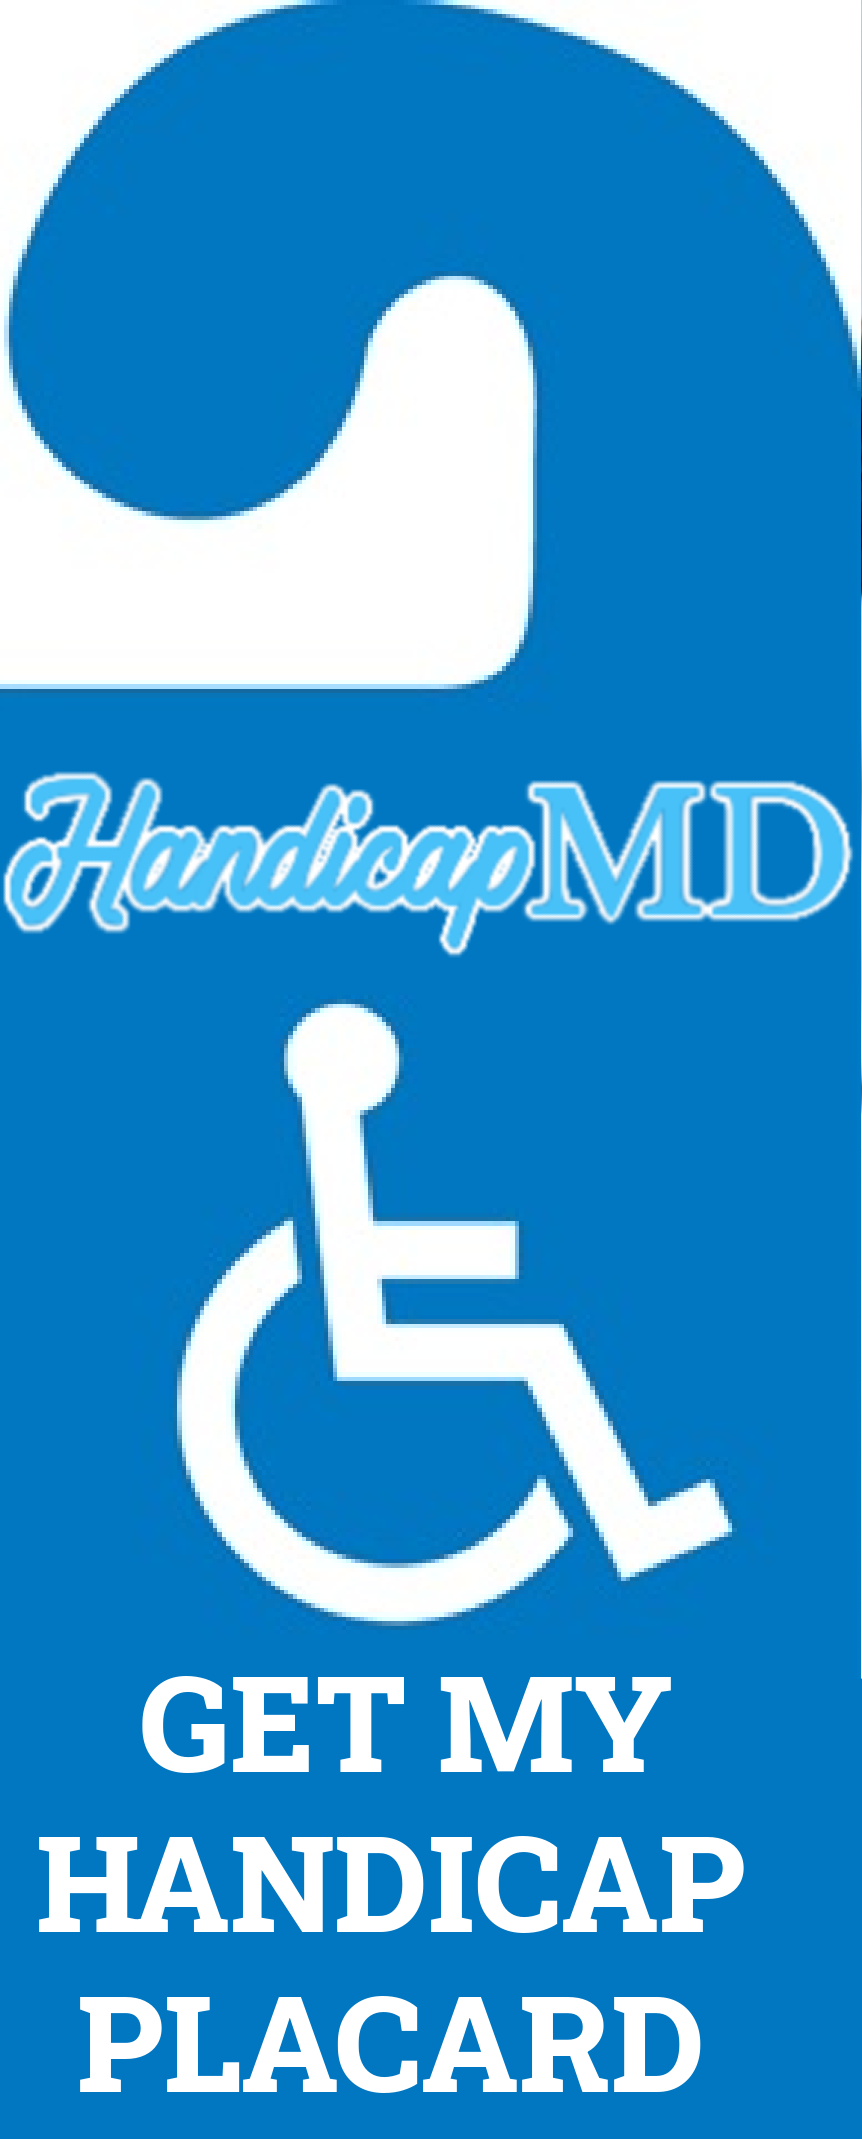 Handicap Placard Violations and Penalties in New Jersey: What You Need to Know